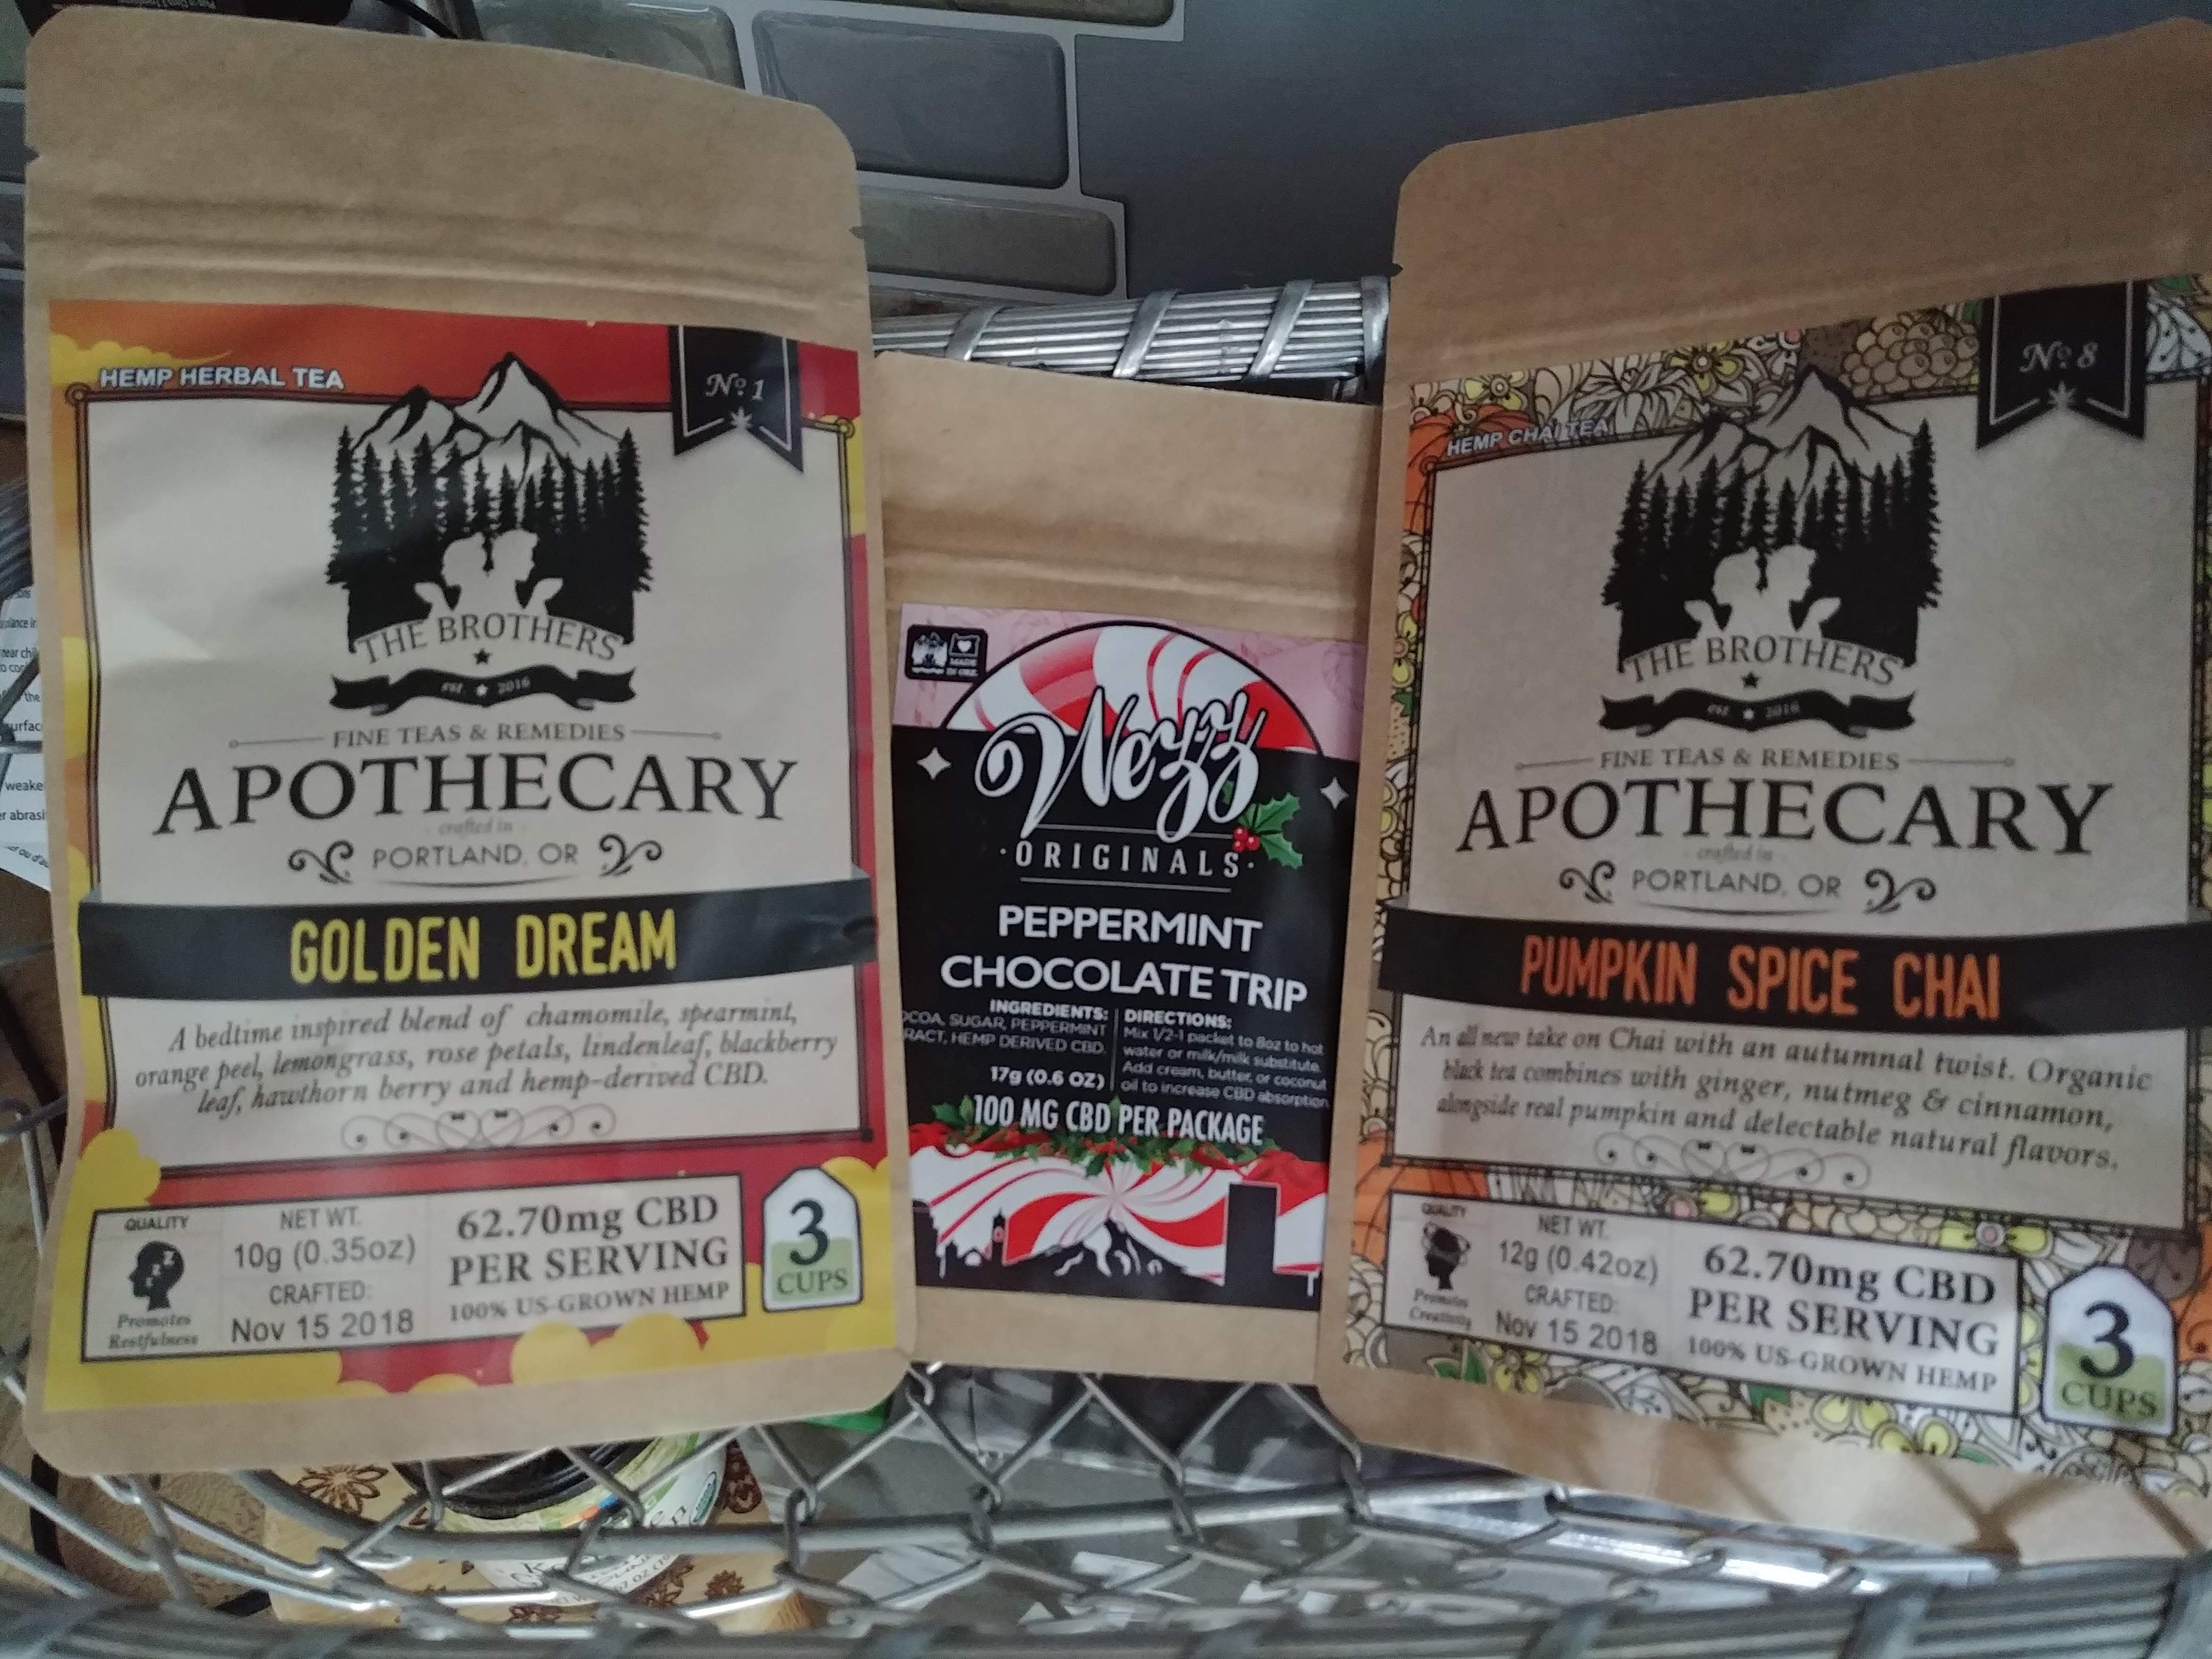 Review: The Brothers Apothecary CBD-infused teas